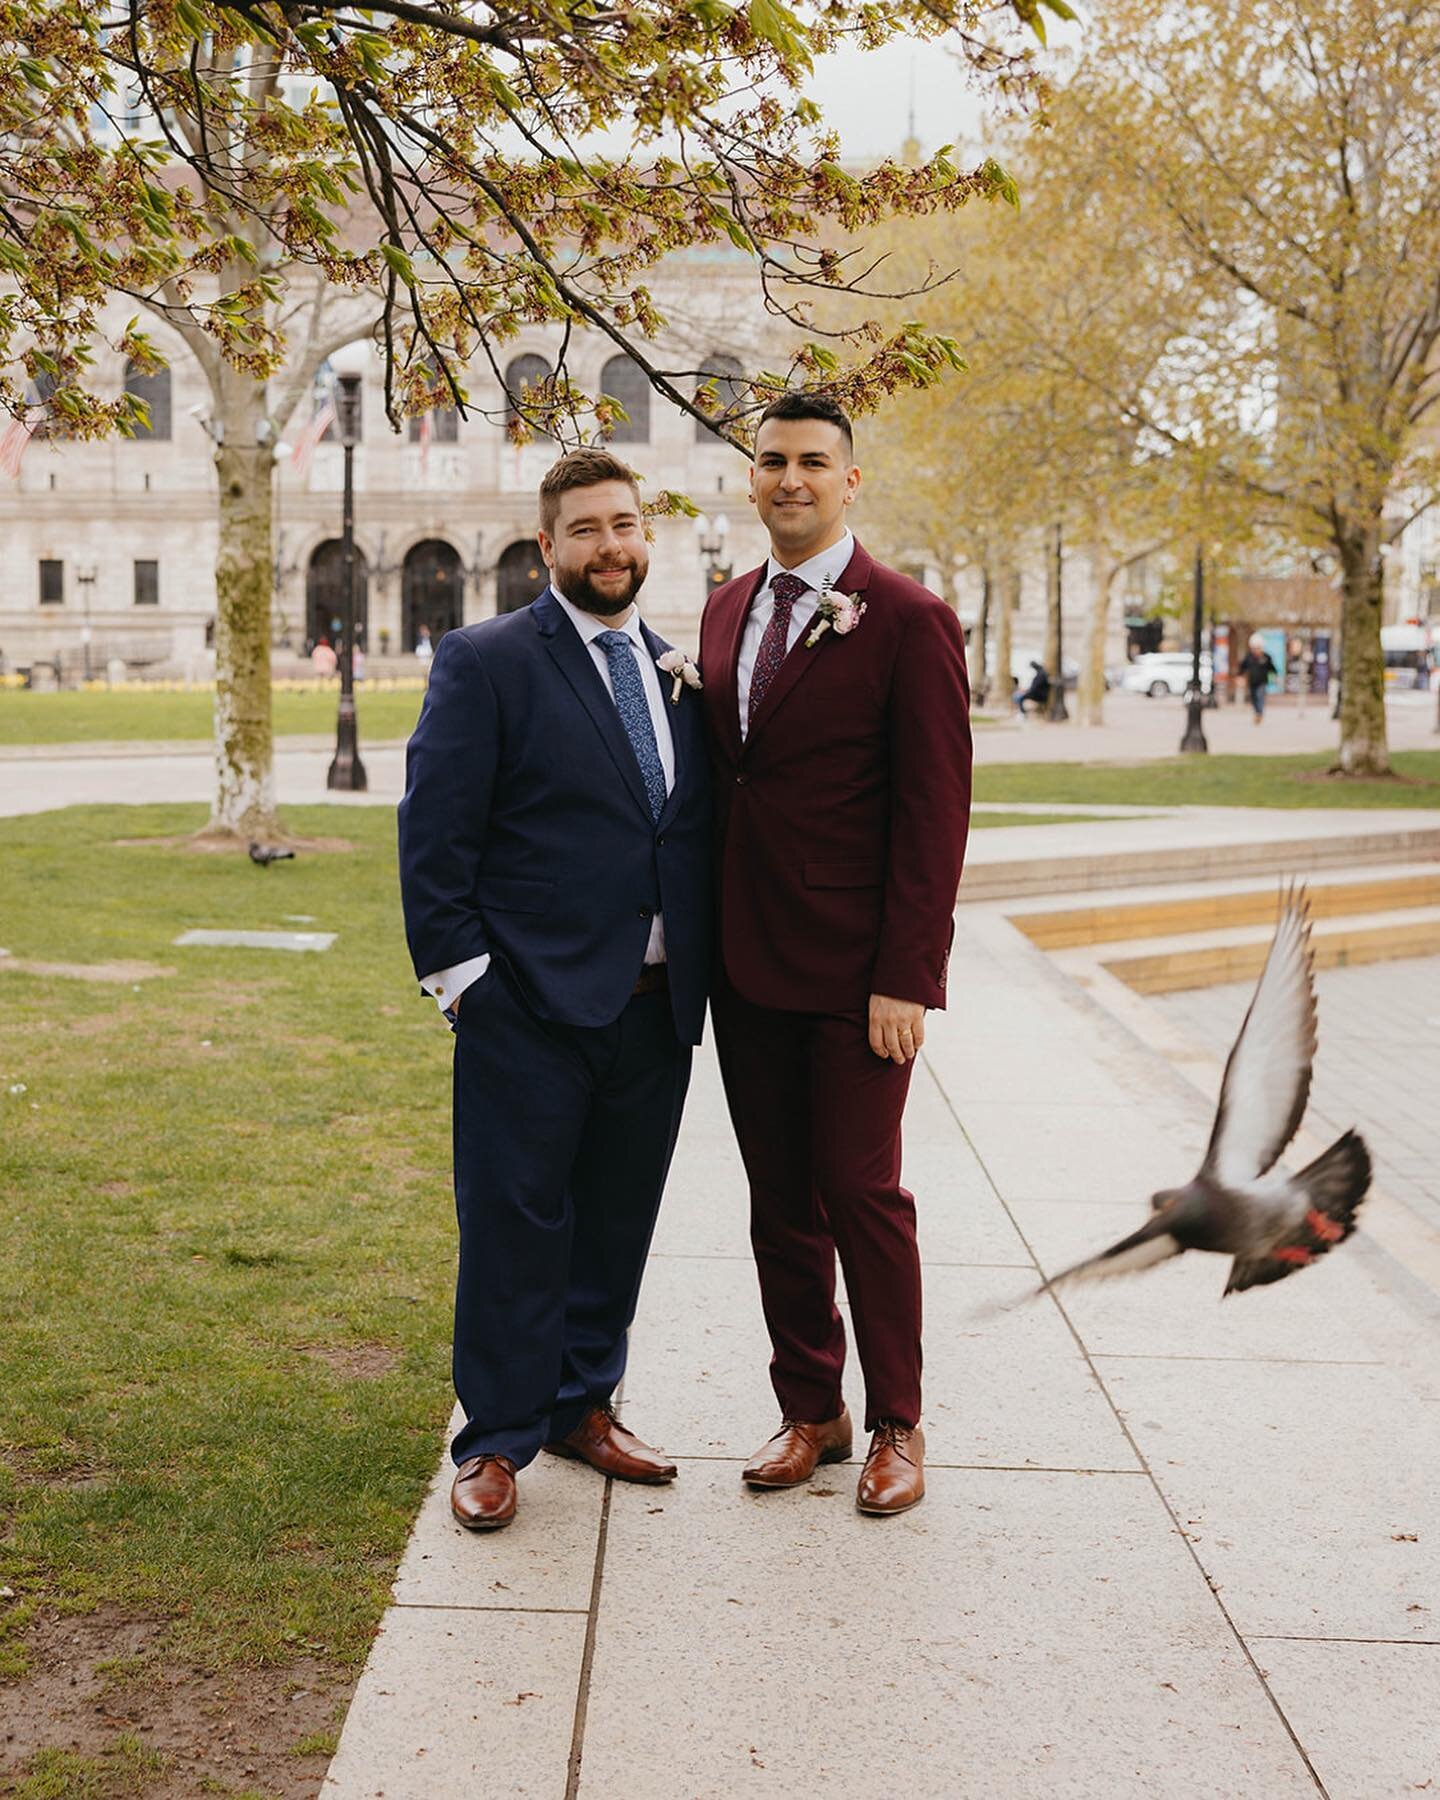 Let&rsquo;s play a game! It&rsquo;s called &quot;Find the flying pigeon&quot; in 2️⃣ of the following images. The first one is easy. GOOD LUCK! 🤔👀🫡

On a serious note, Sean &amp; Fady&rsquo;s wedding was one of the only weddings I&rsquo;ve cried a